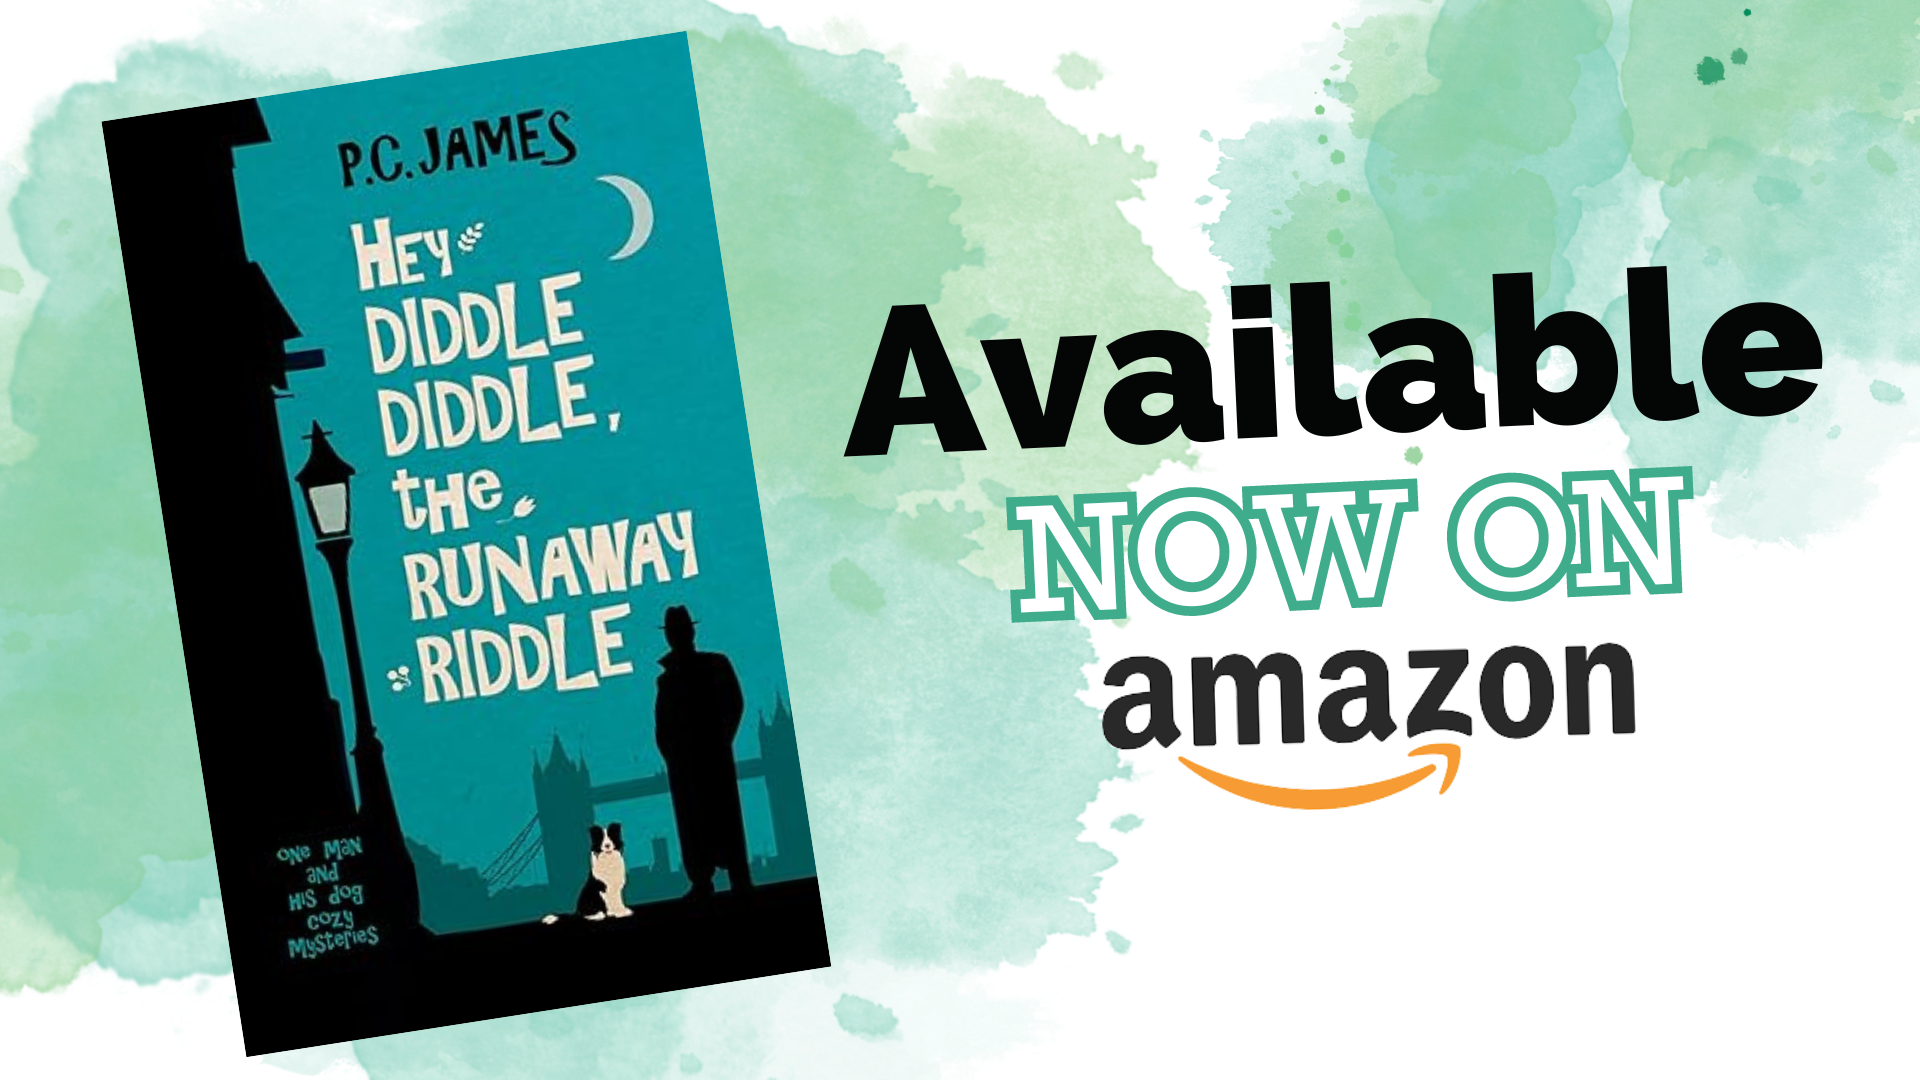 Hey Diddle Diddle, the Runaway Riddle—NOW AVAILABLE IN AMAZON